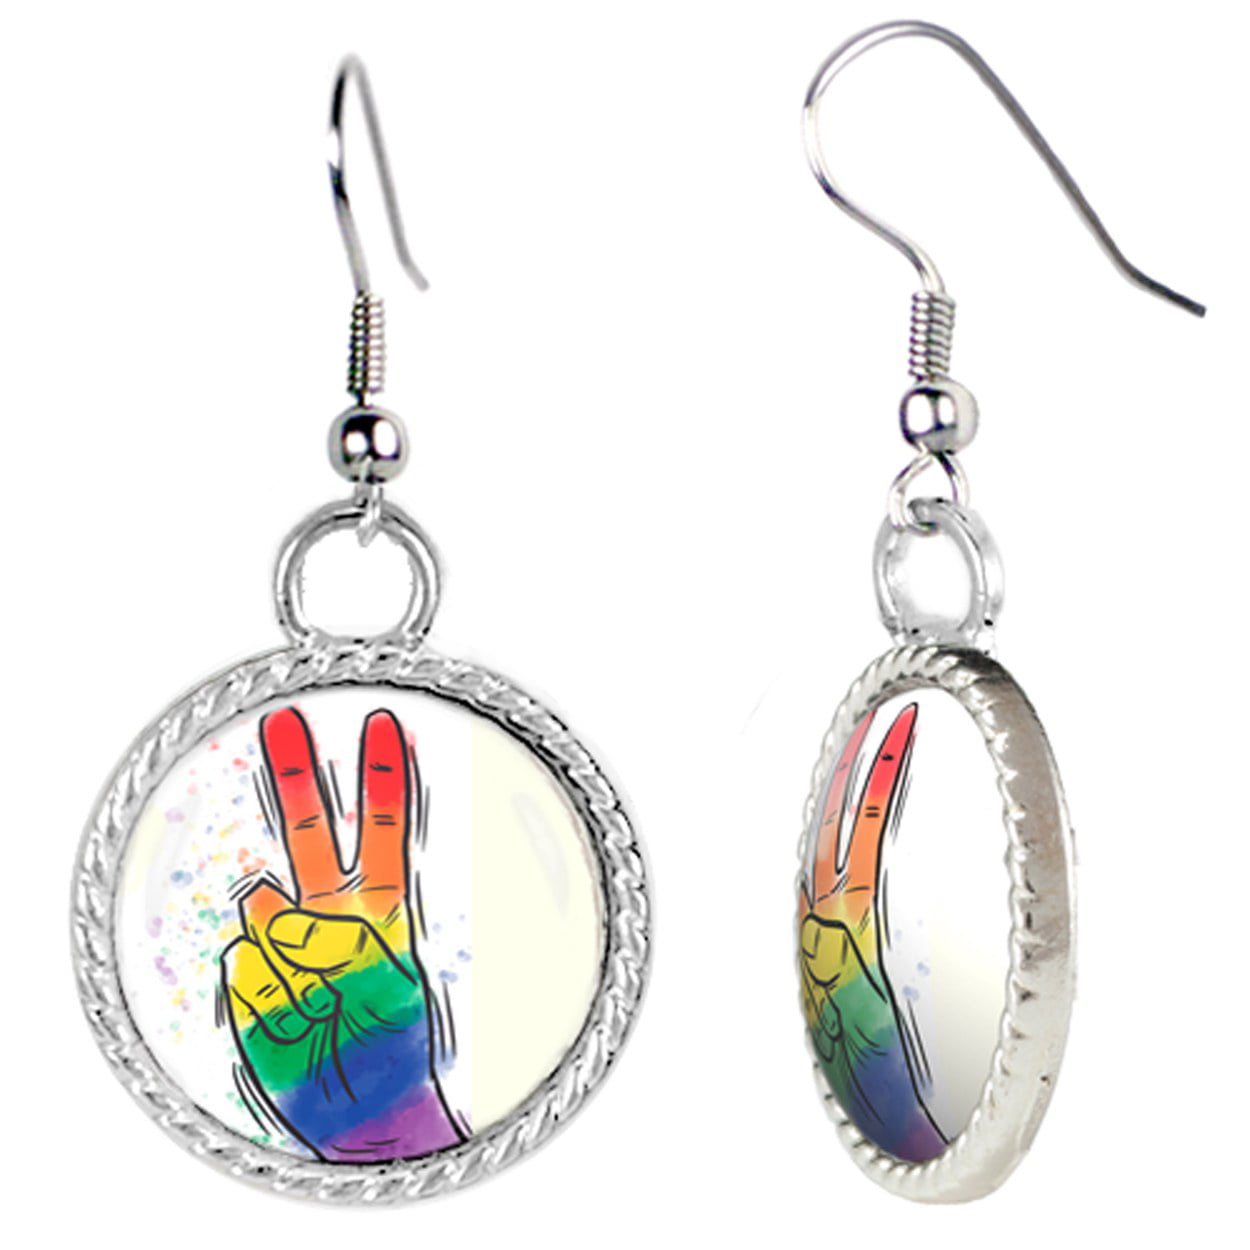 Mad Marble - Peace Sign Made Up of Rainbow Colors for LGBTQ Pride Earrings